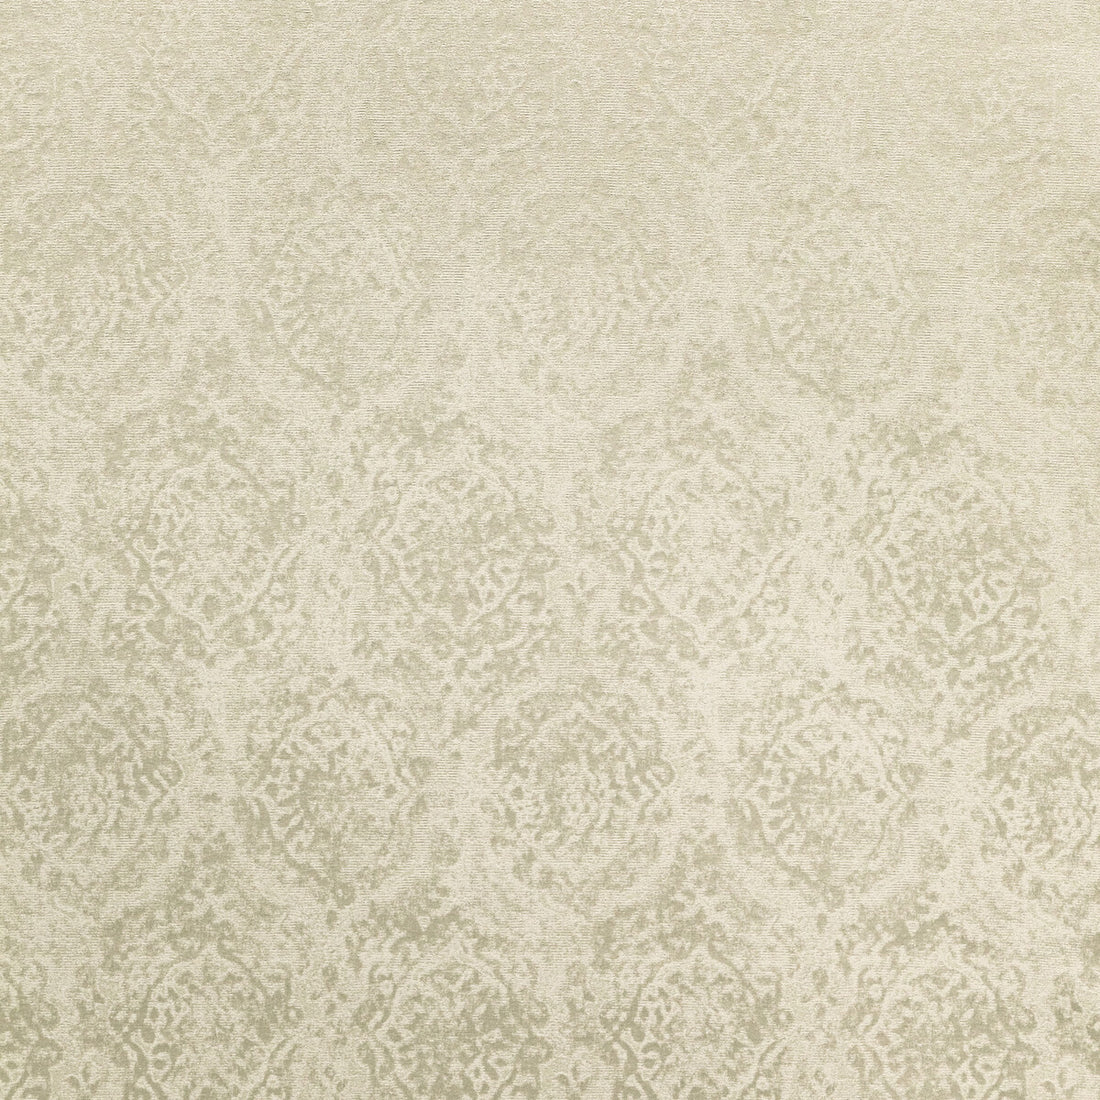 Omni Damask fabric in cream color - pattern 36577.16.0 - by Kravet Couture in the Modern Luxe Silk Luster collection